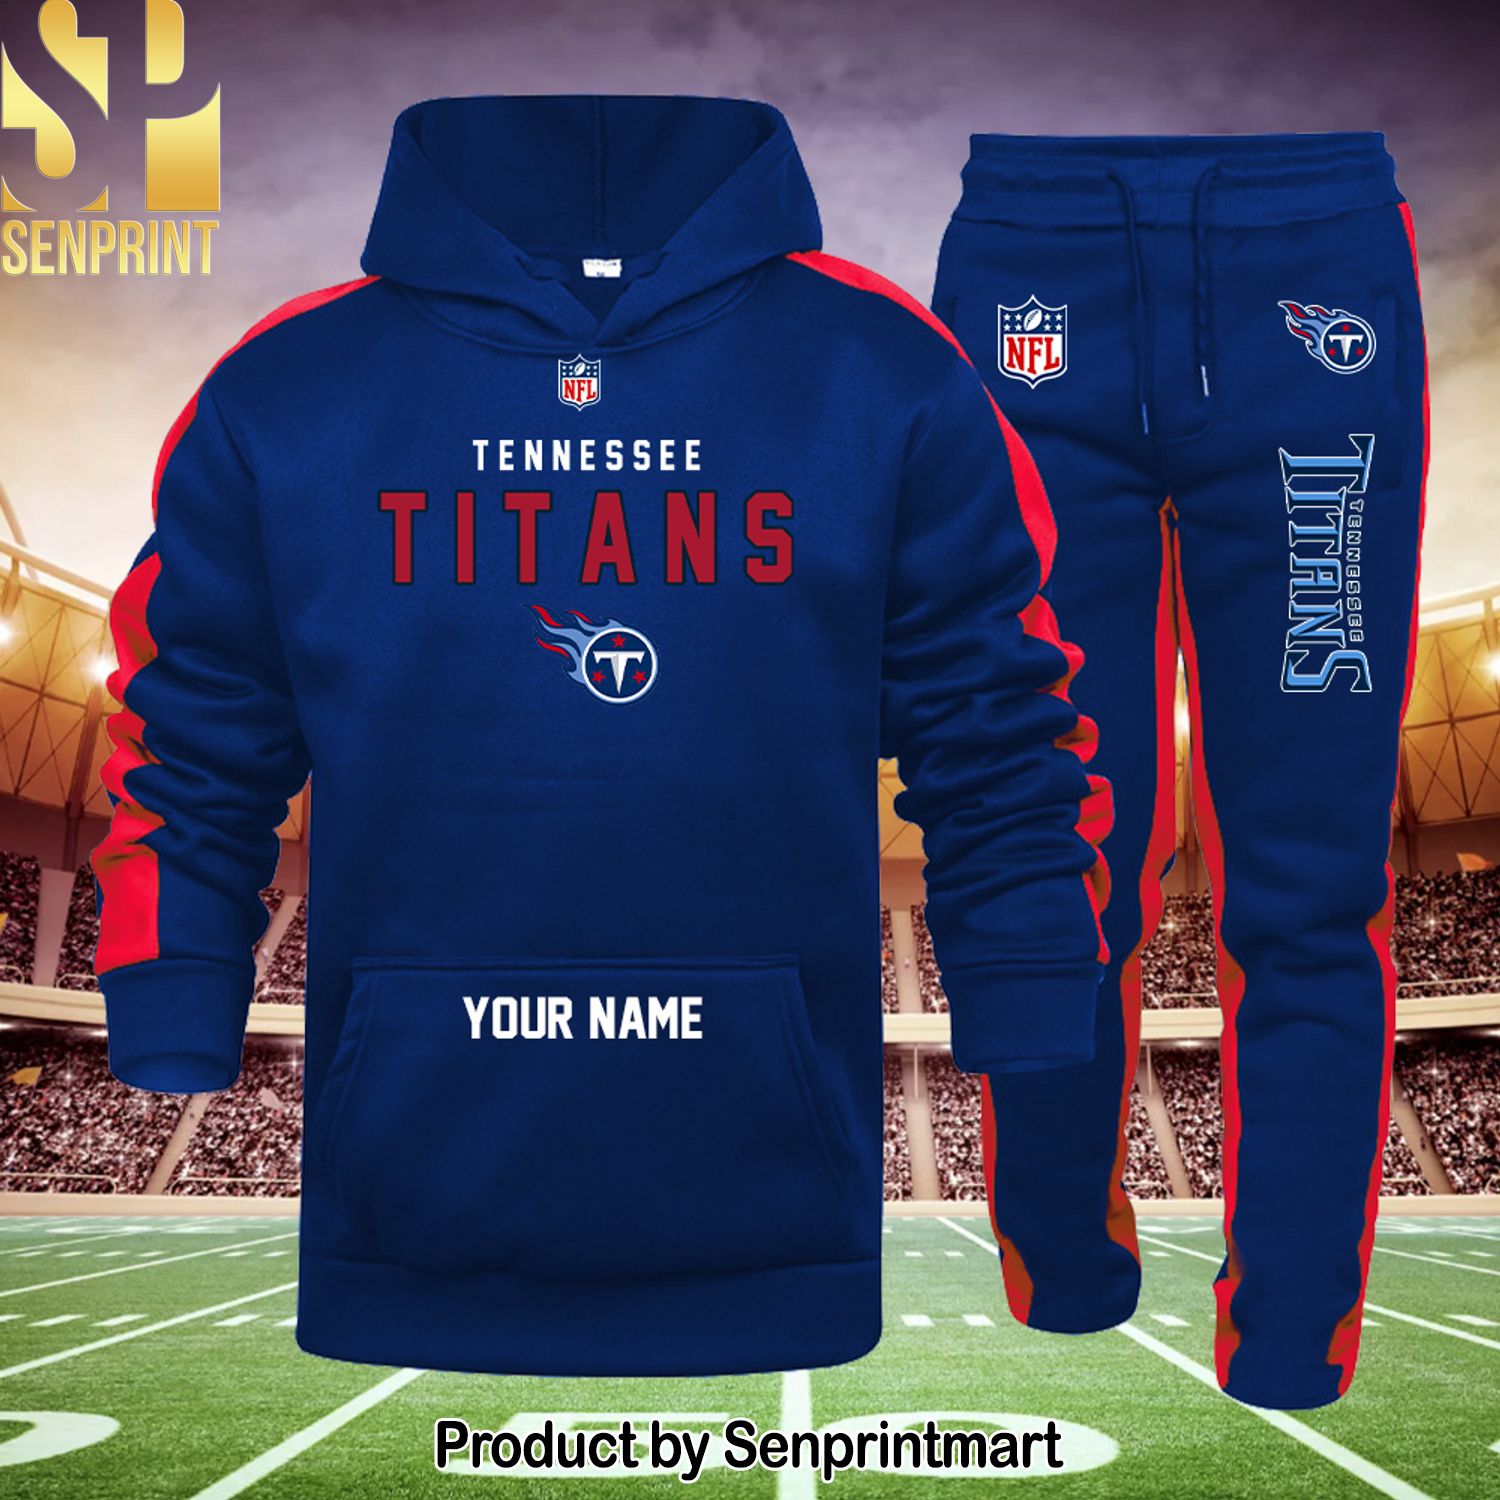 NFL Tennessee Titans Classic Full Printed Shirt and Sweatpants